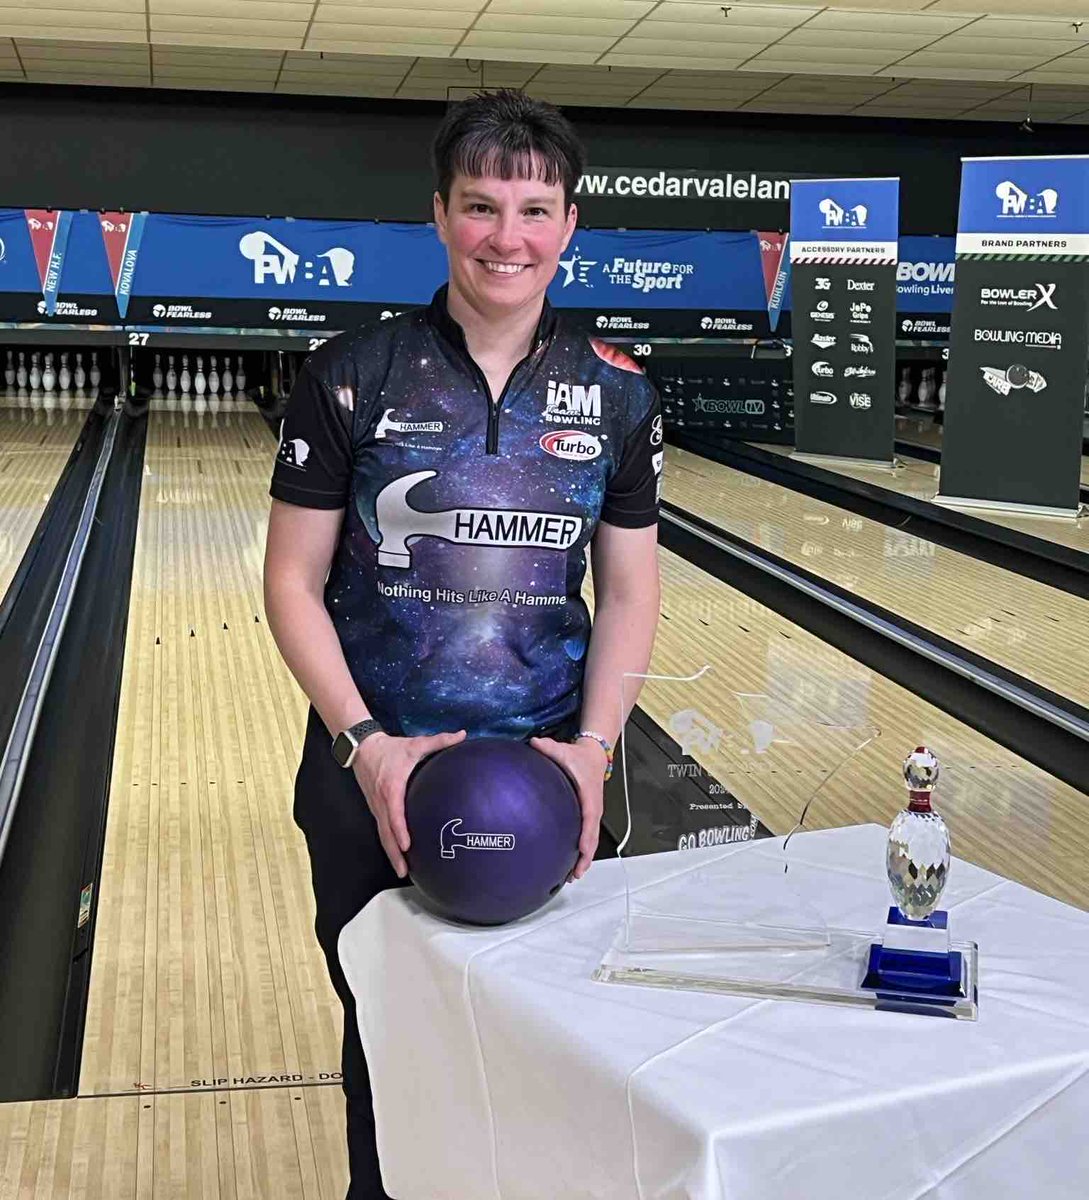 Shannon Pluhowsky wins the PWBA GoBowling Twin Cities Open! 🏆
#HammerBowling #PWBATour #PurpleHammer 
#NothingHitsLikeAHammer 🔨